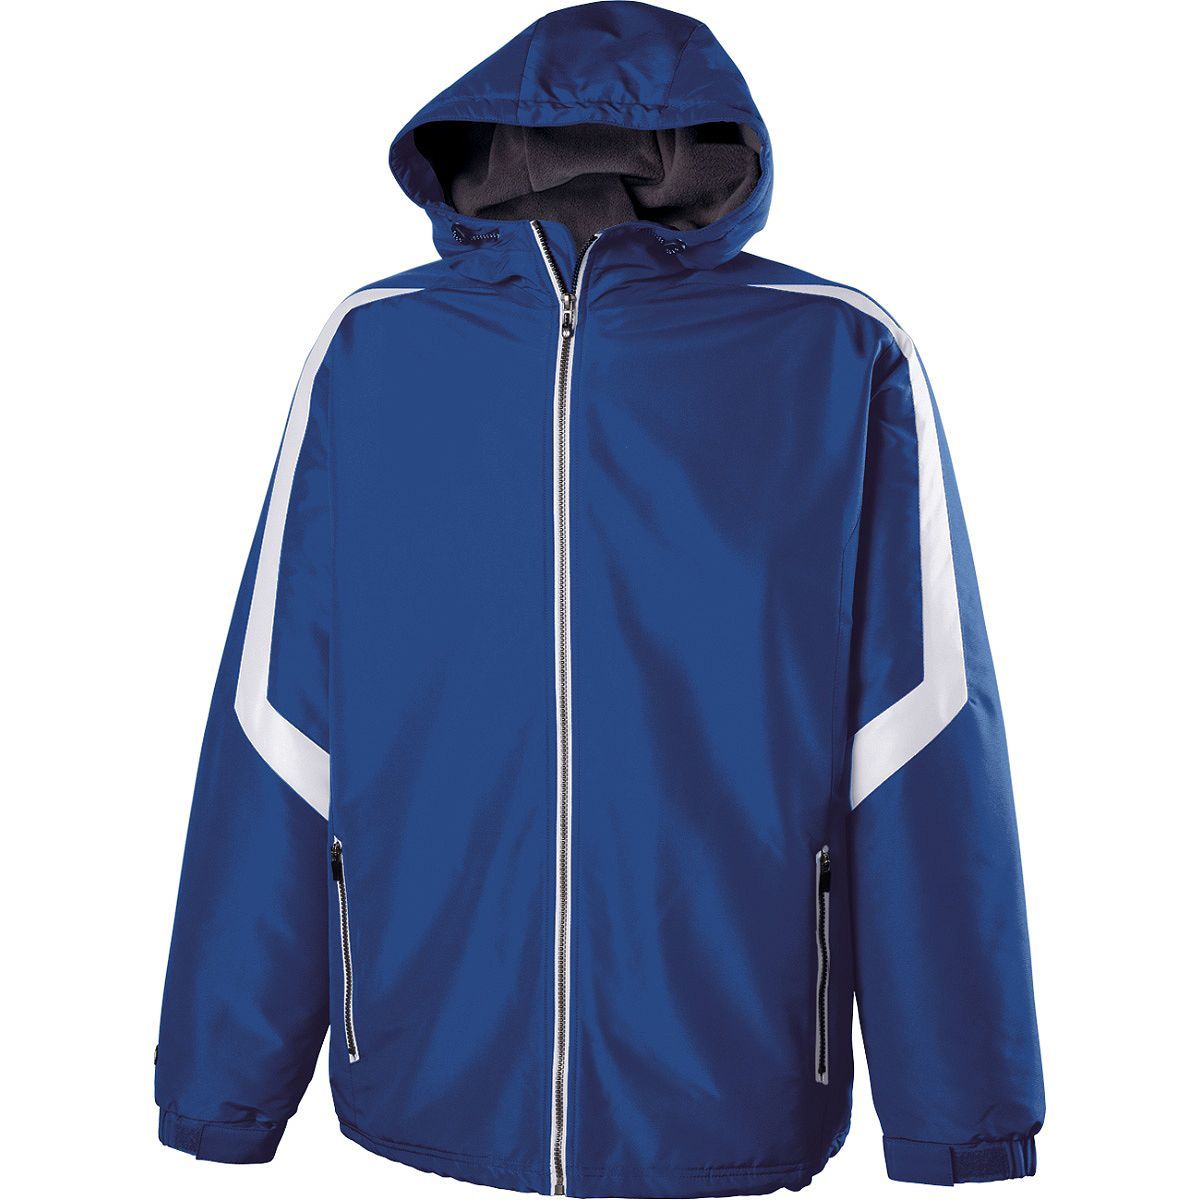 Youth Charger Jacket 229259